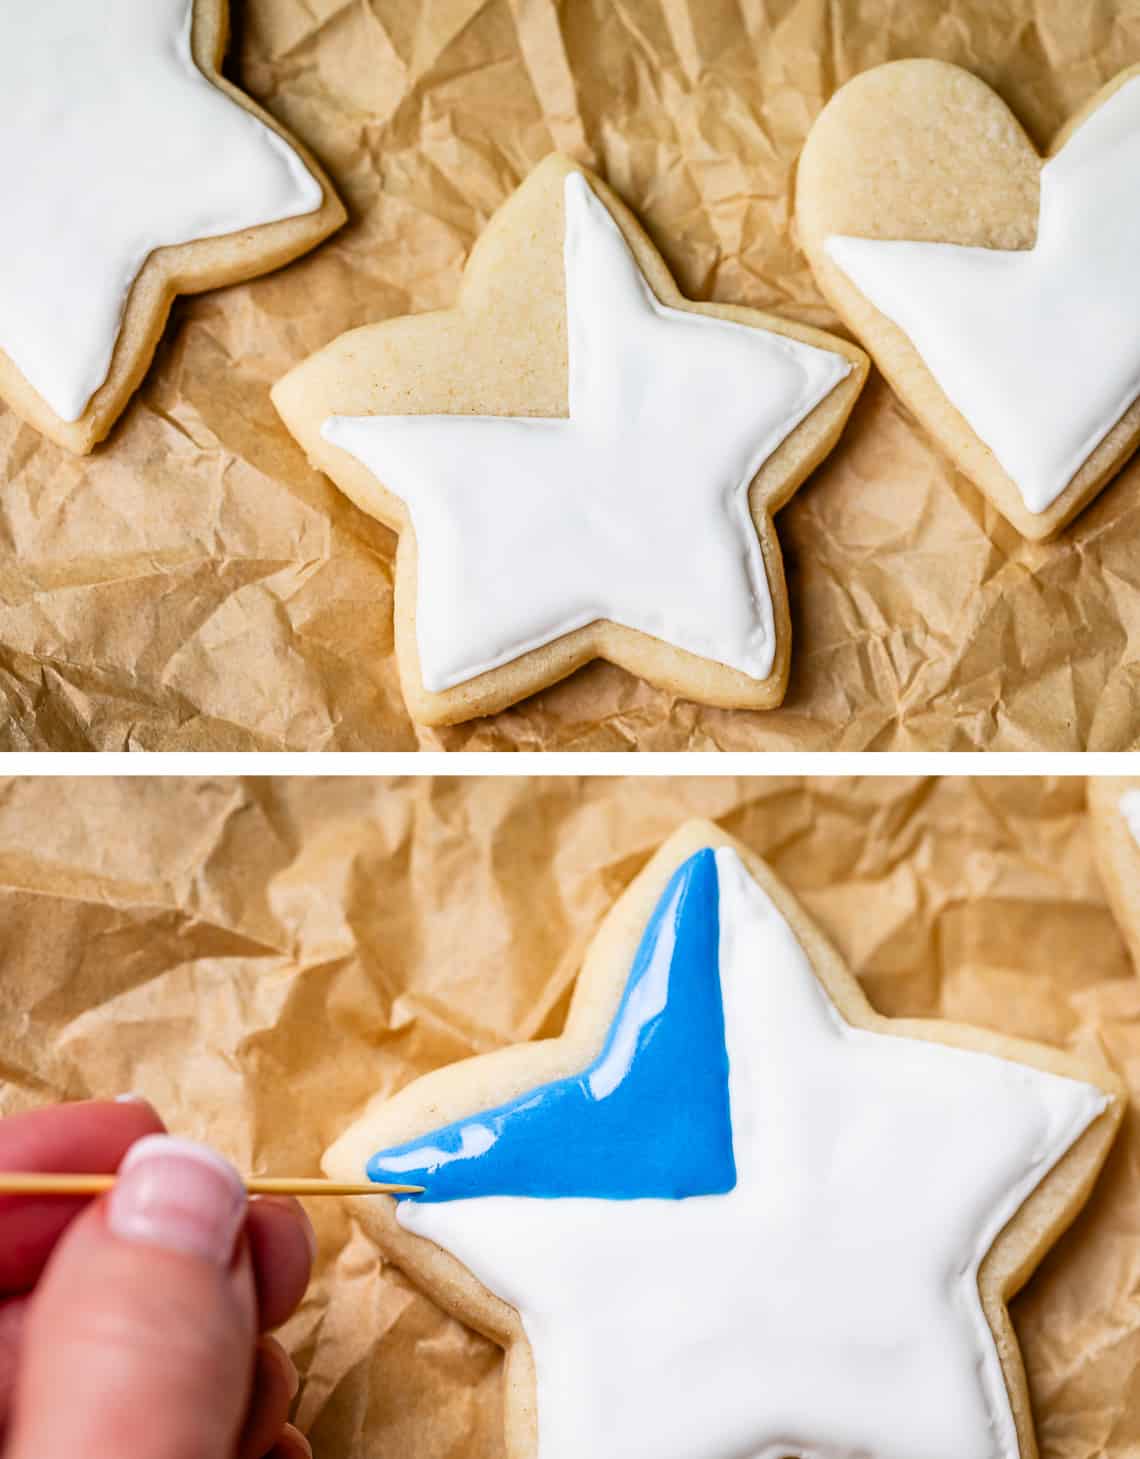 top star with white frosting on all but one side, bottom filling in the empty spot with blue icing.